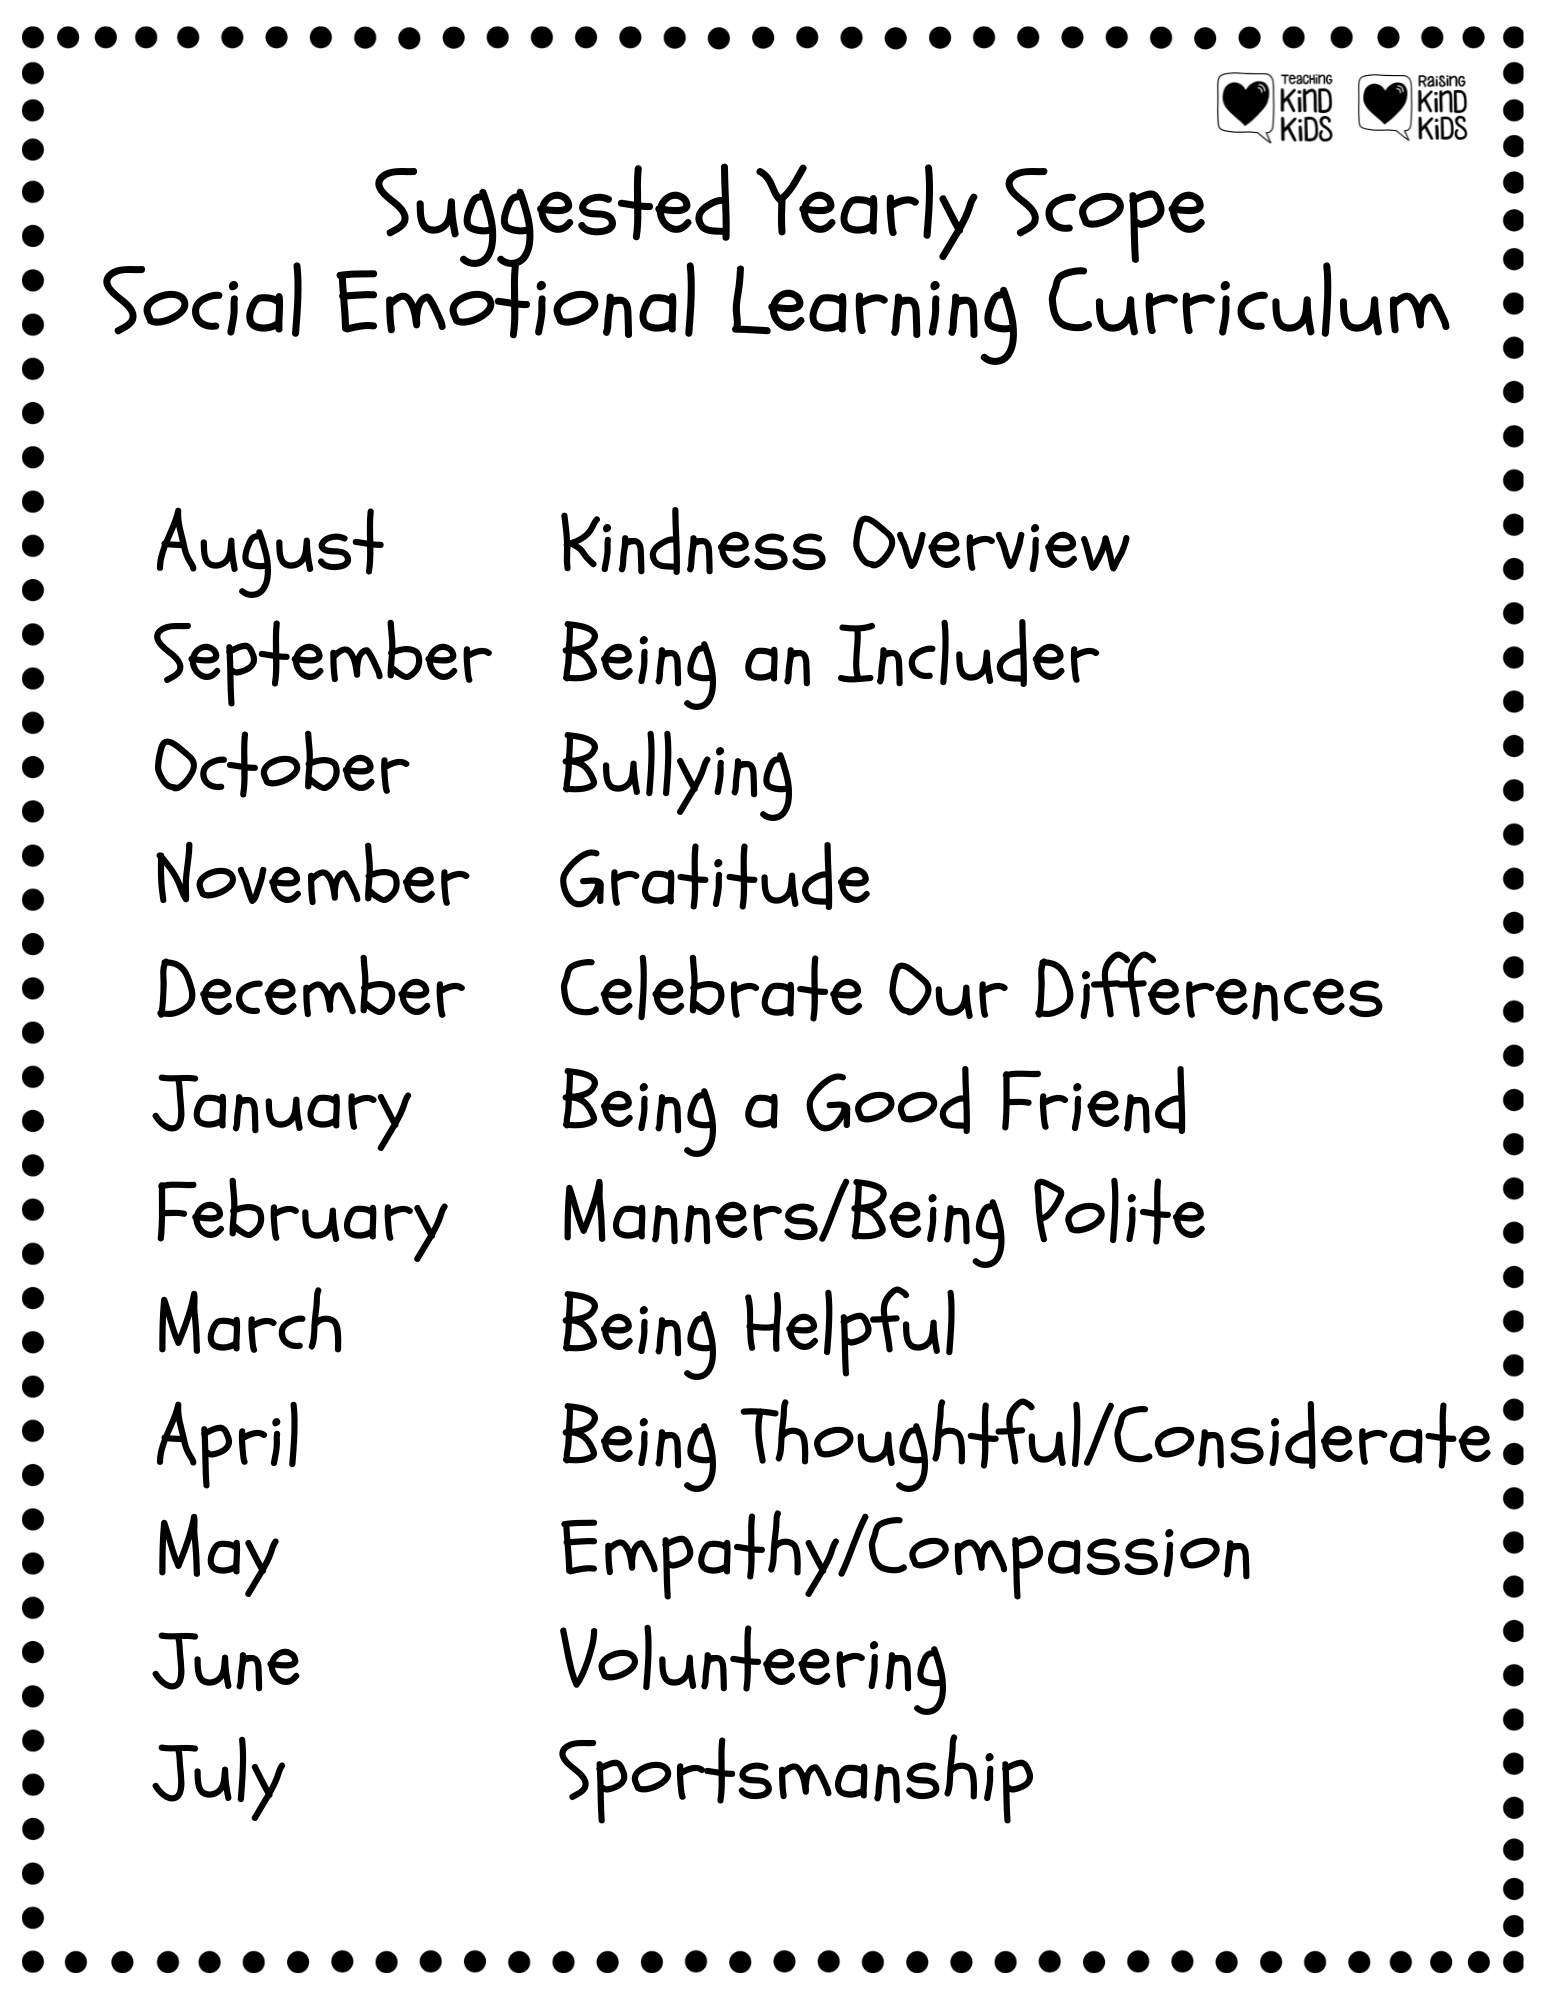 Use this social emotional learning curriculum to teach sel and kindness concepts to elementary school students. 